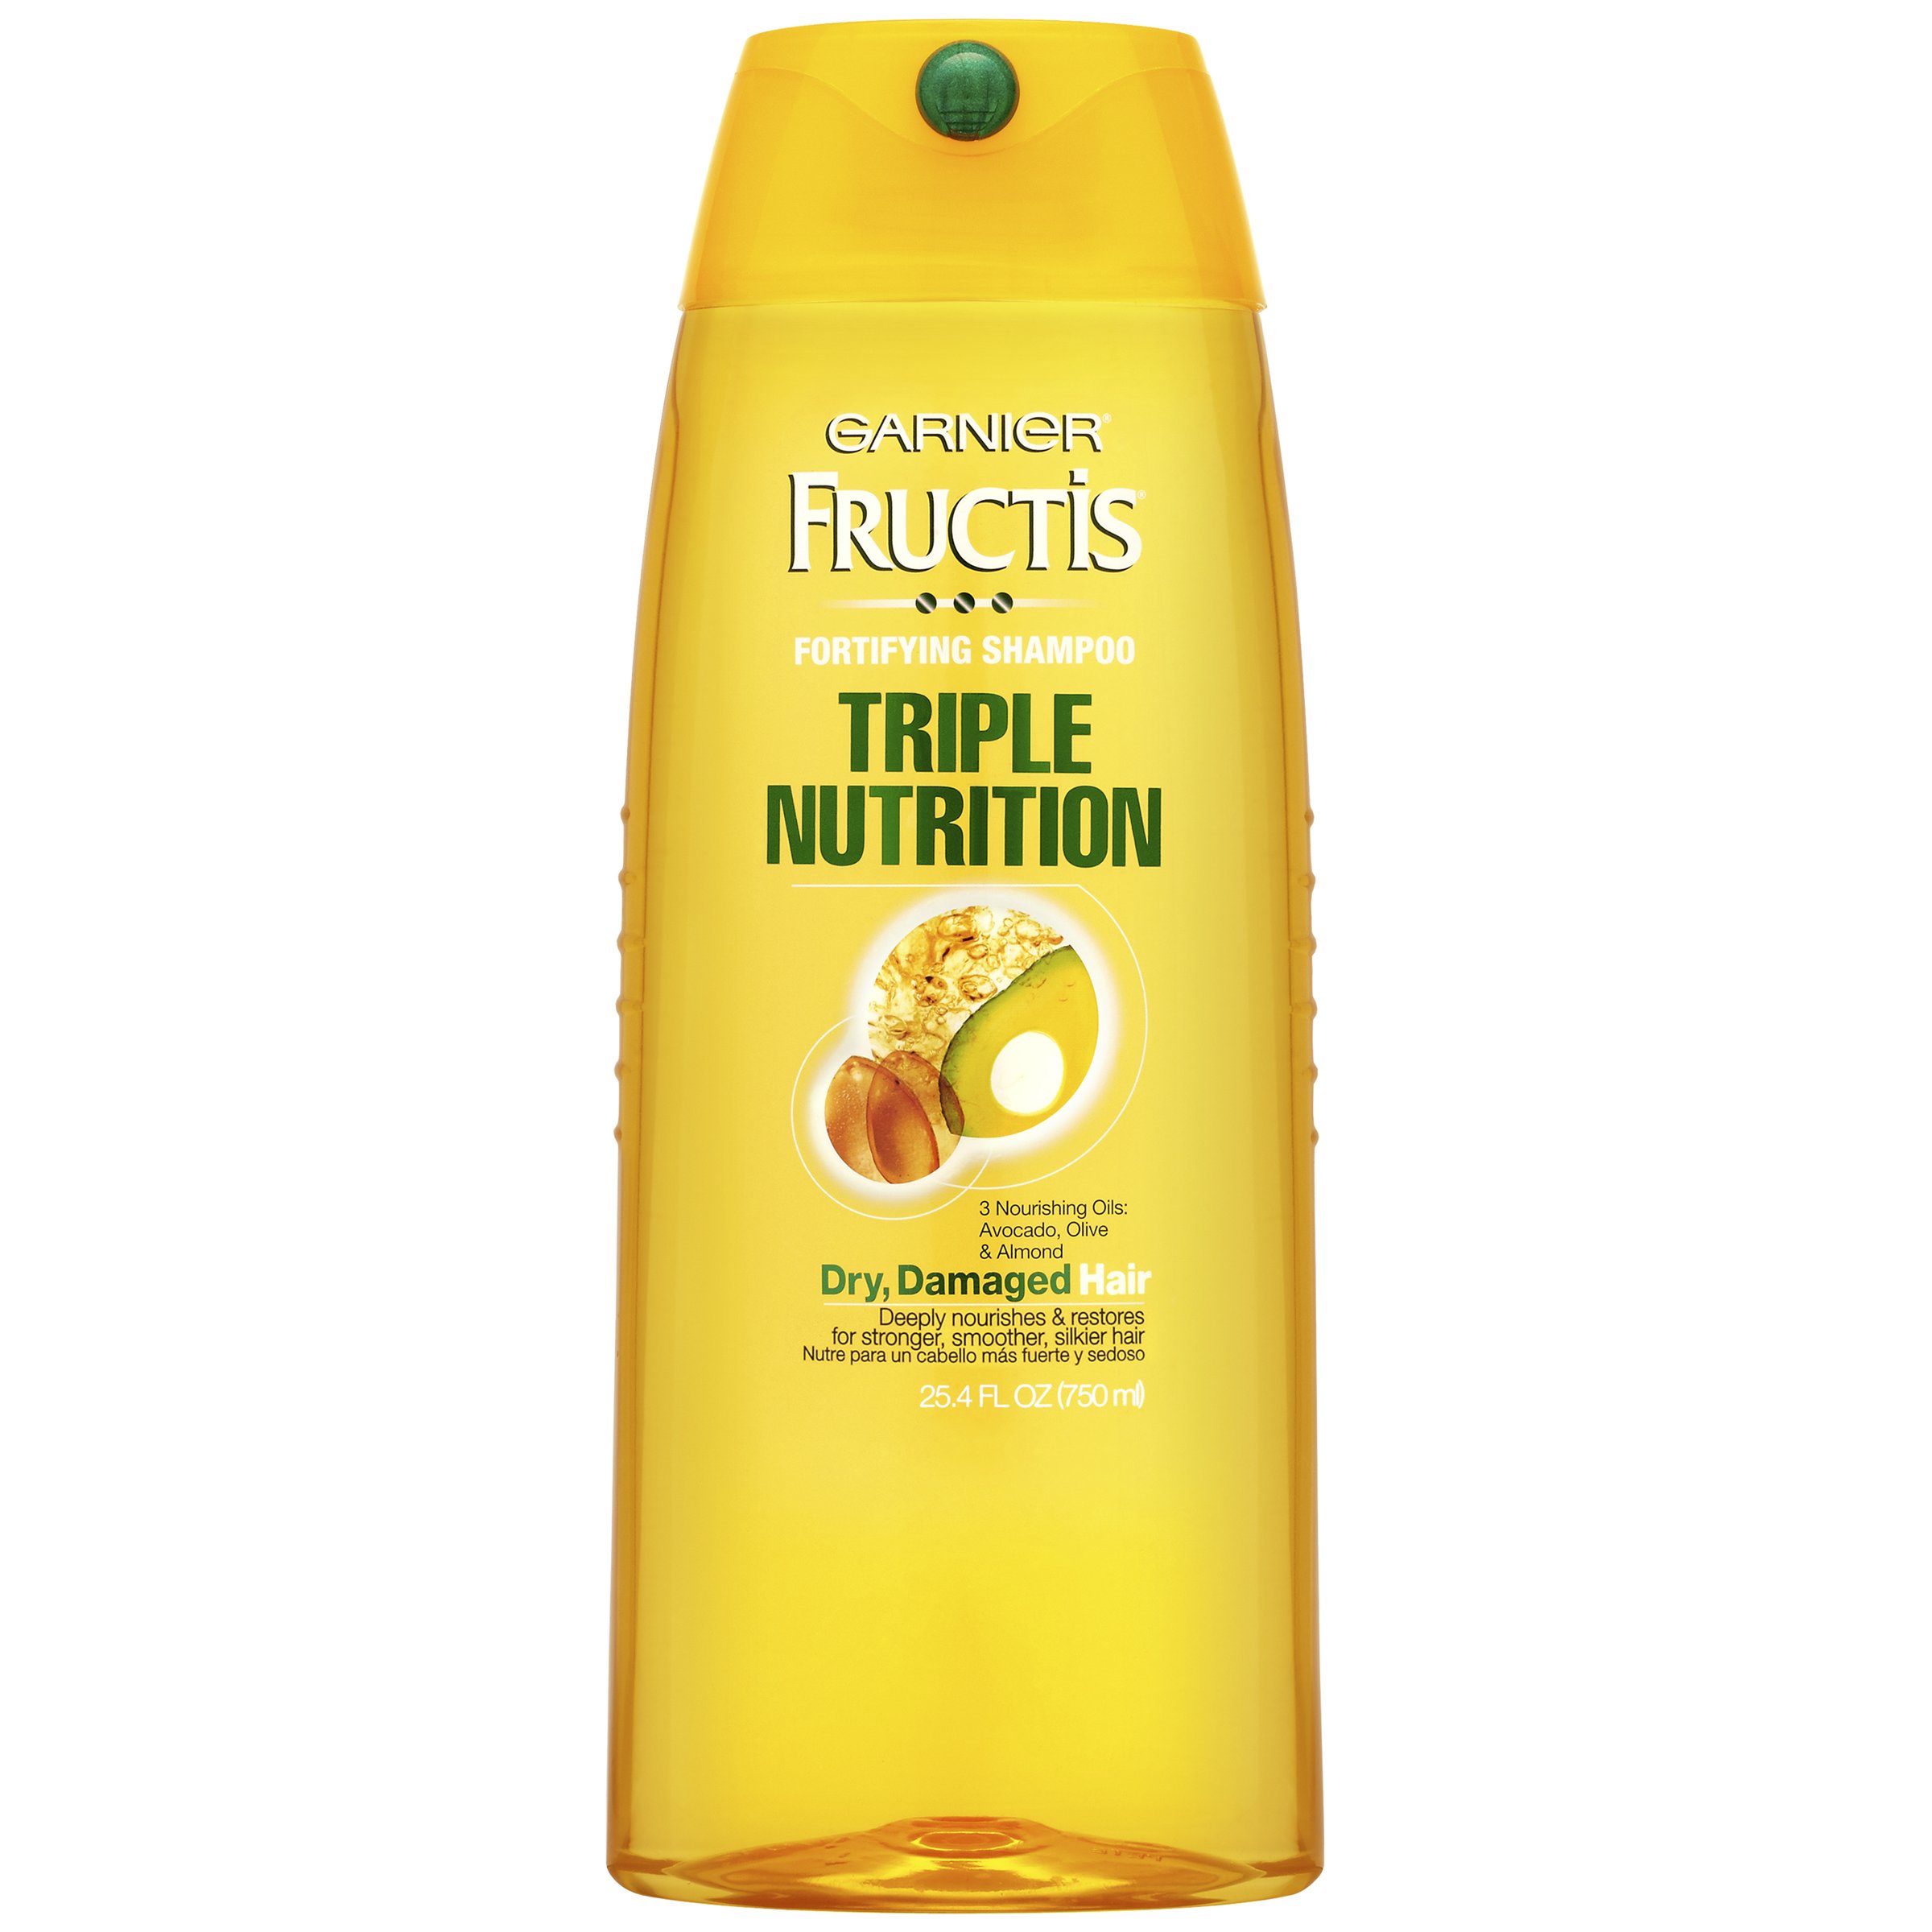 & at Fructis Conditioner - H-E-B Fortifying Damaged Dry Triple Shampoo for Garnier Nutrition Shampoo Shop Hair